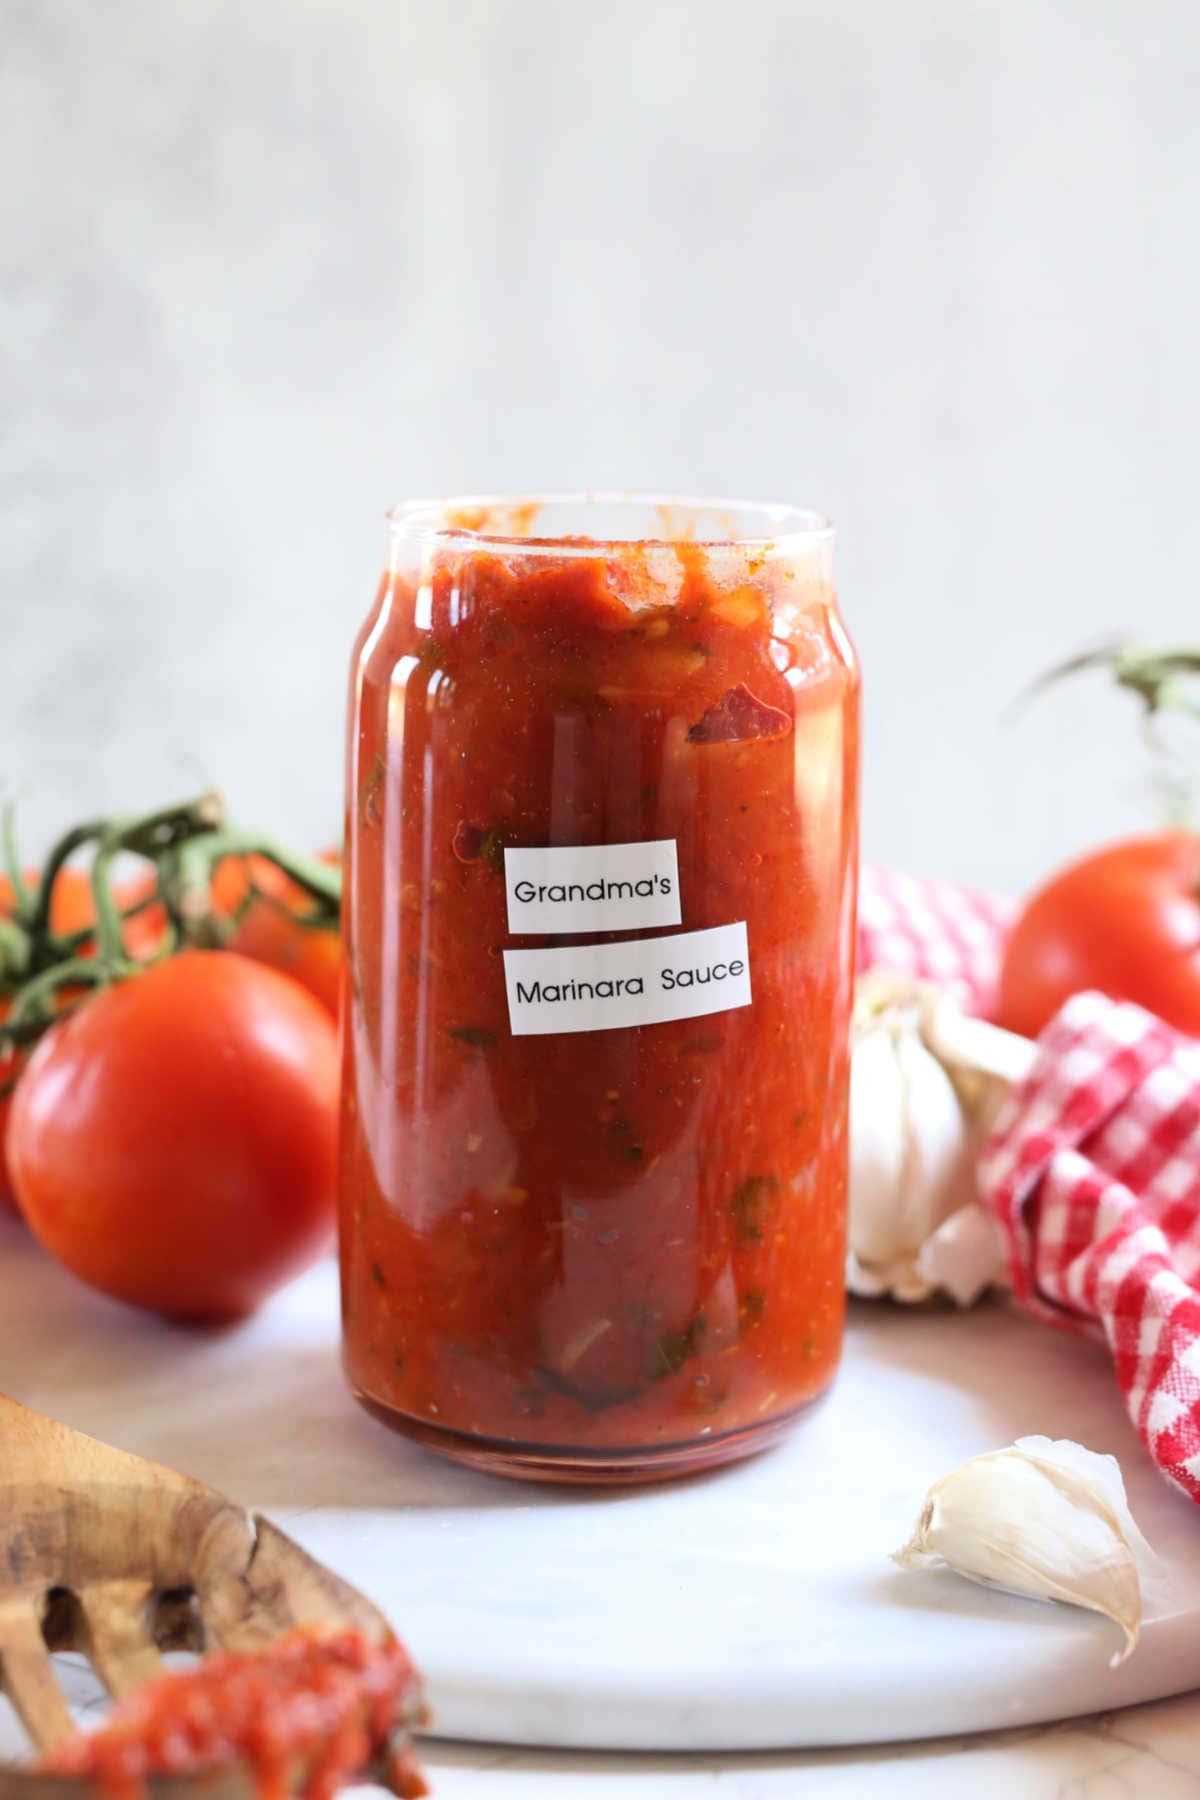 Easy marinara sauce recipe in a jar with a label.